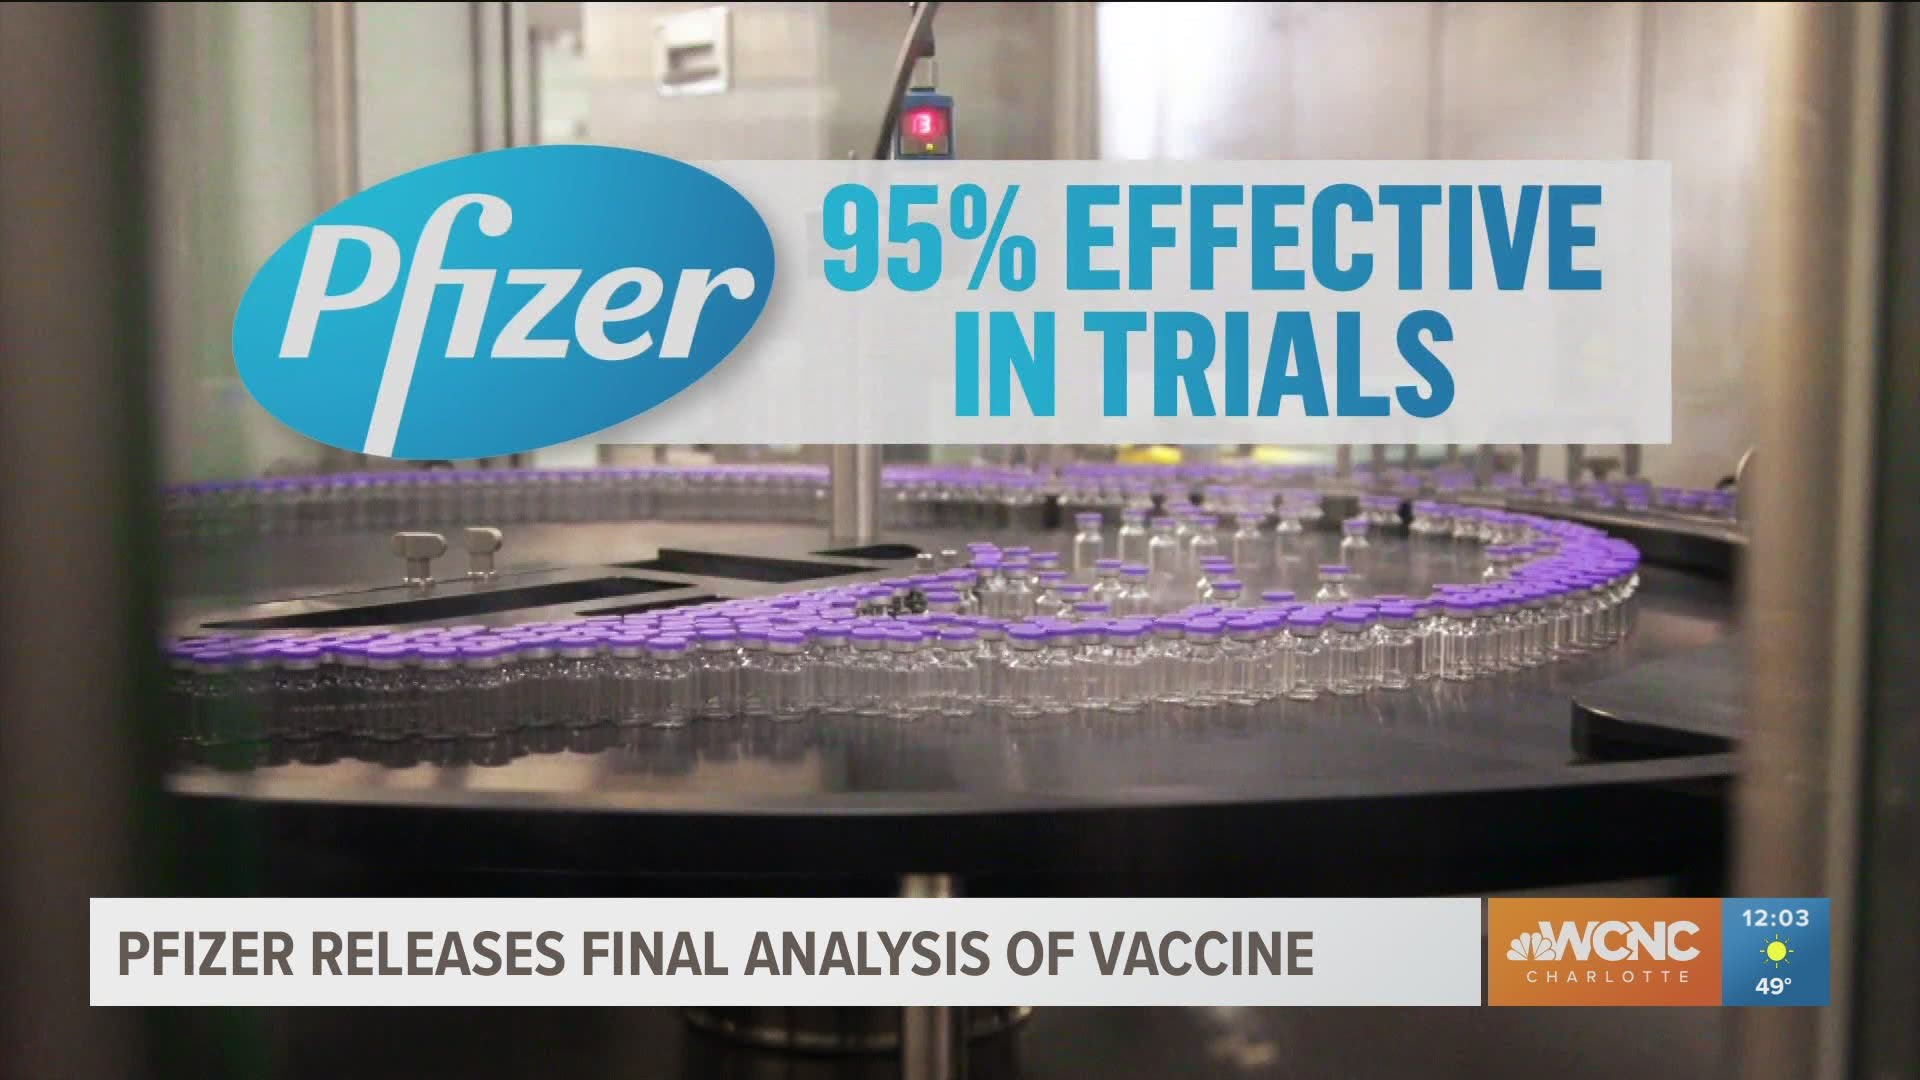 Pfizer says final analysis shows its COVID-19 vaccine is 95% effective and they will seek emergency approval from the FDA for distribution "within days."